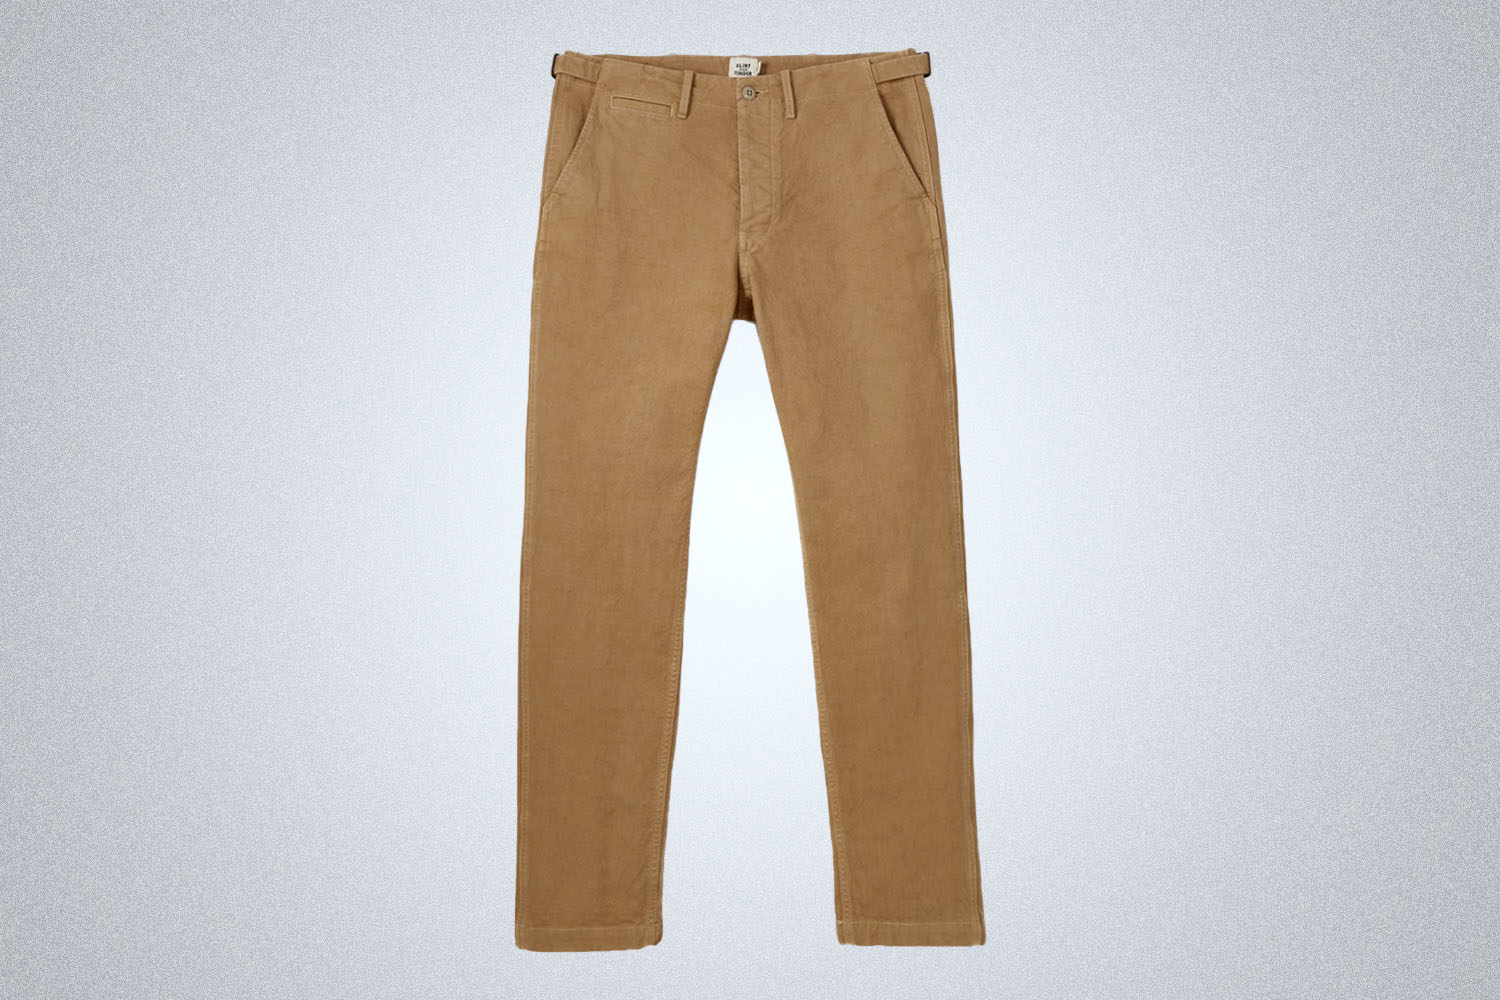 a pair of chino trousers on a grey background